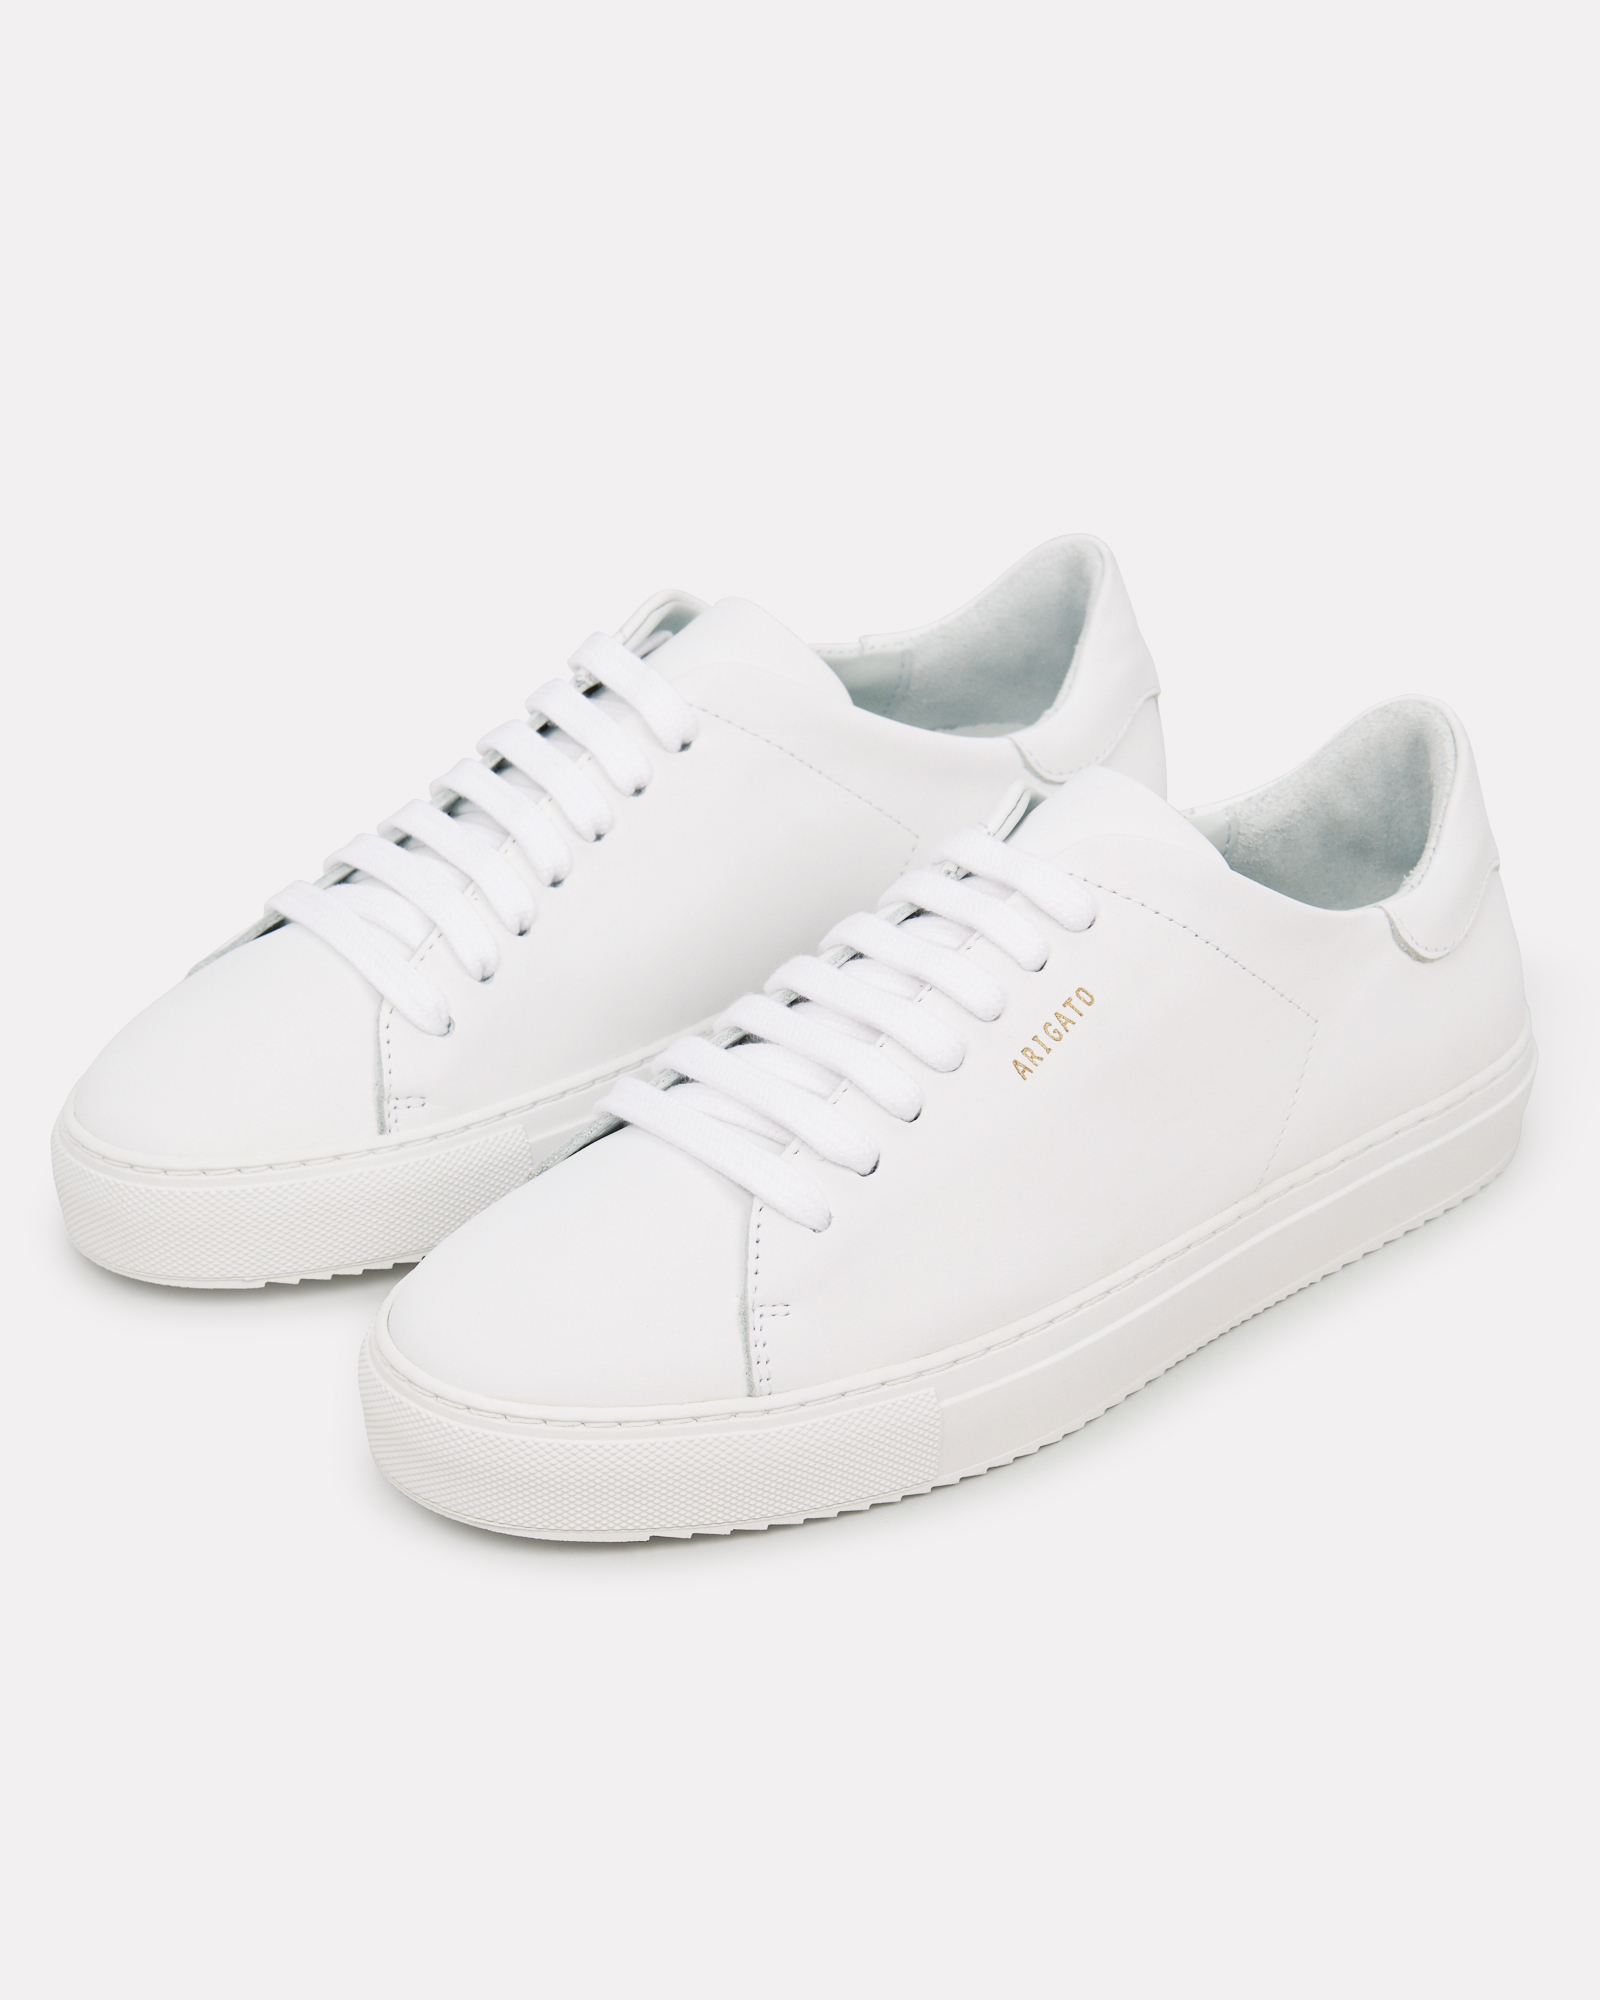 Axel Arigato Clean 90 Leather Sneakers | INTERMIX®